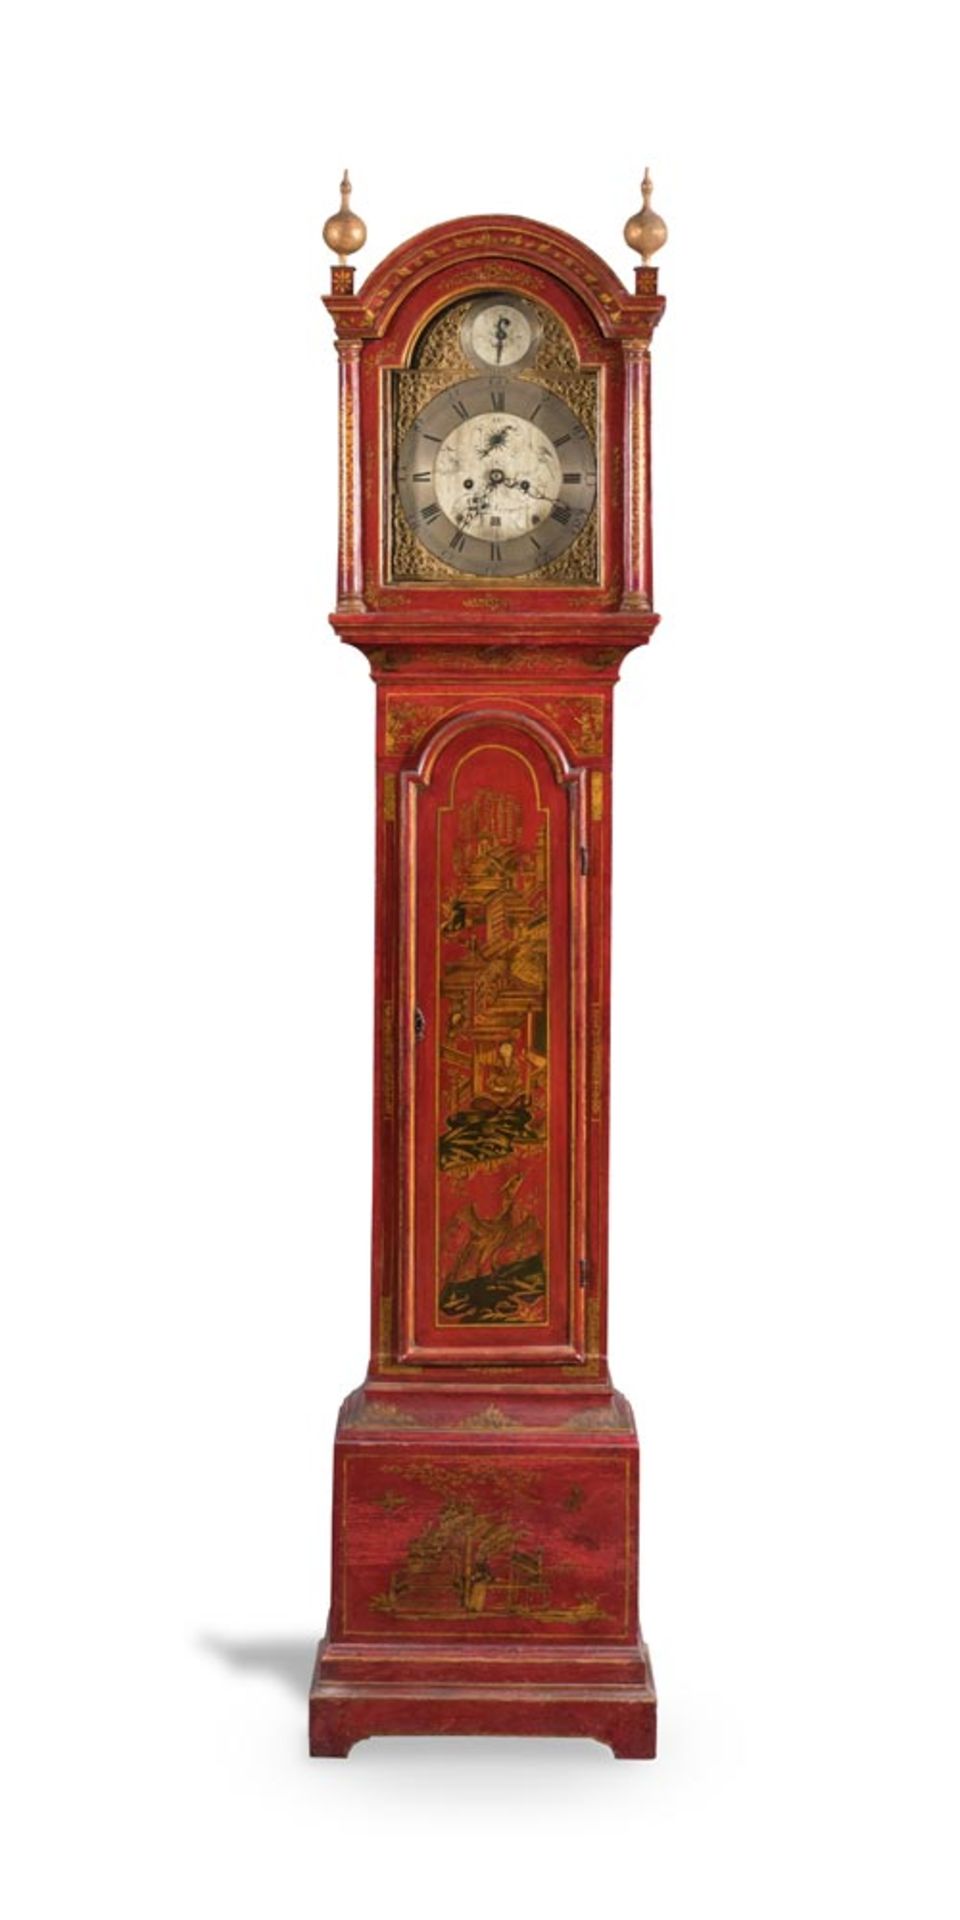 English Red Lacquer Longcase Clock with Chinoiserie Design, 18th Century.